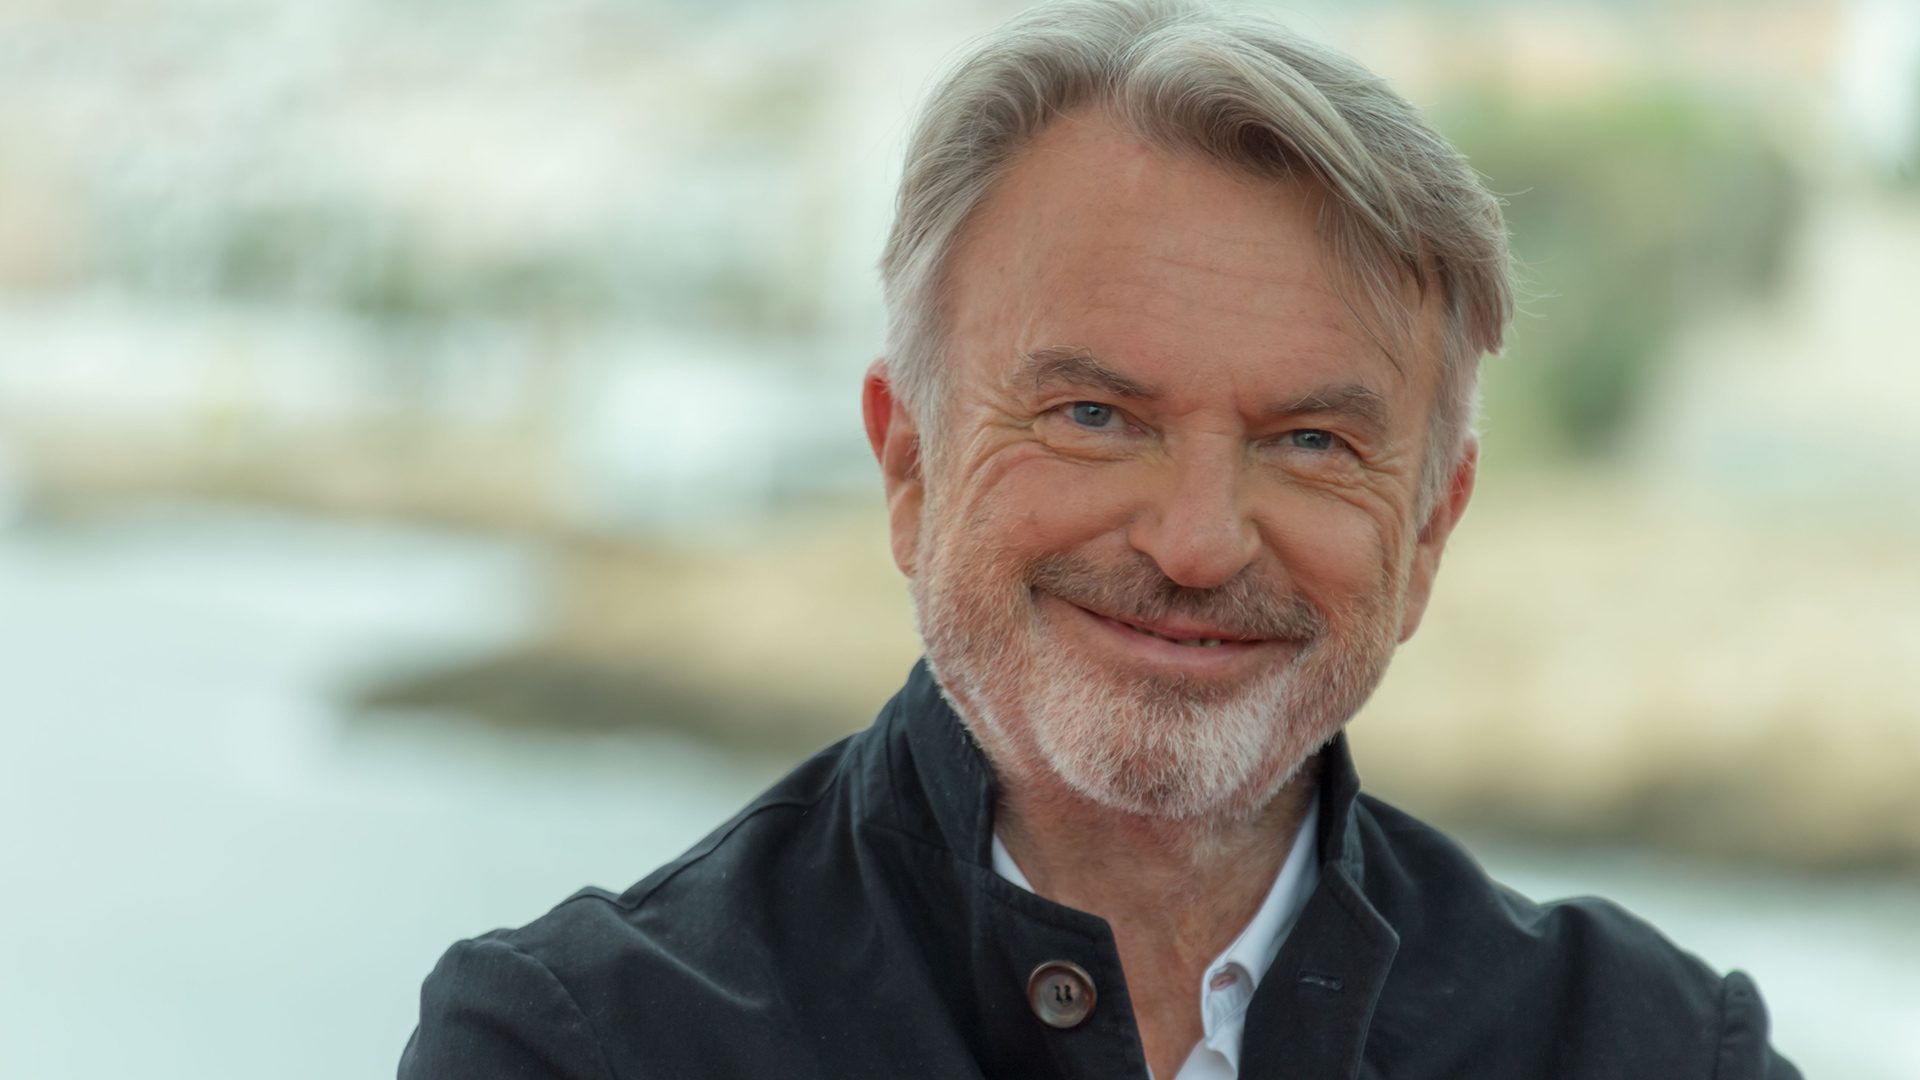 Actor Sam Neill receiving treatment for stage-three ‘blood cancer’